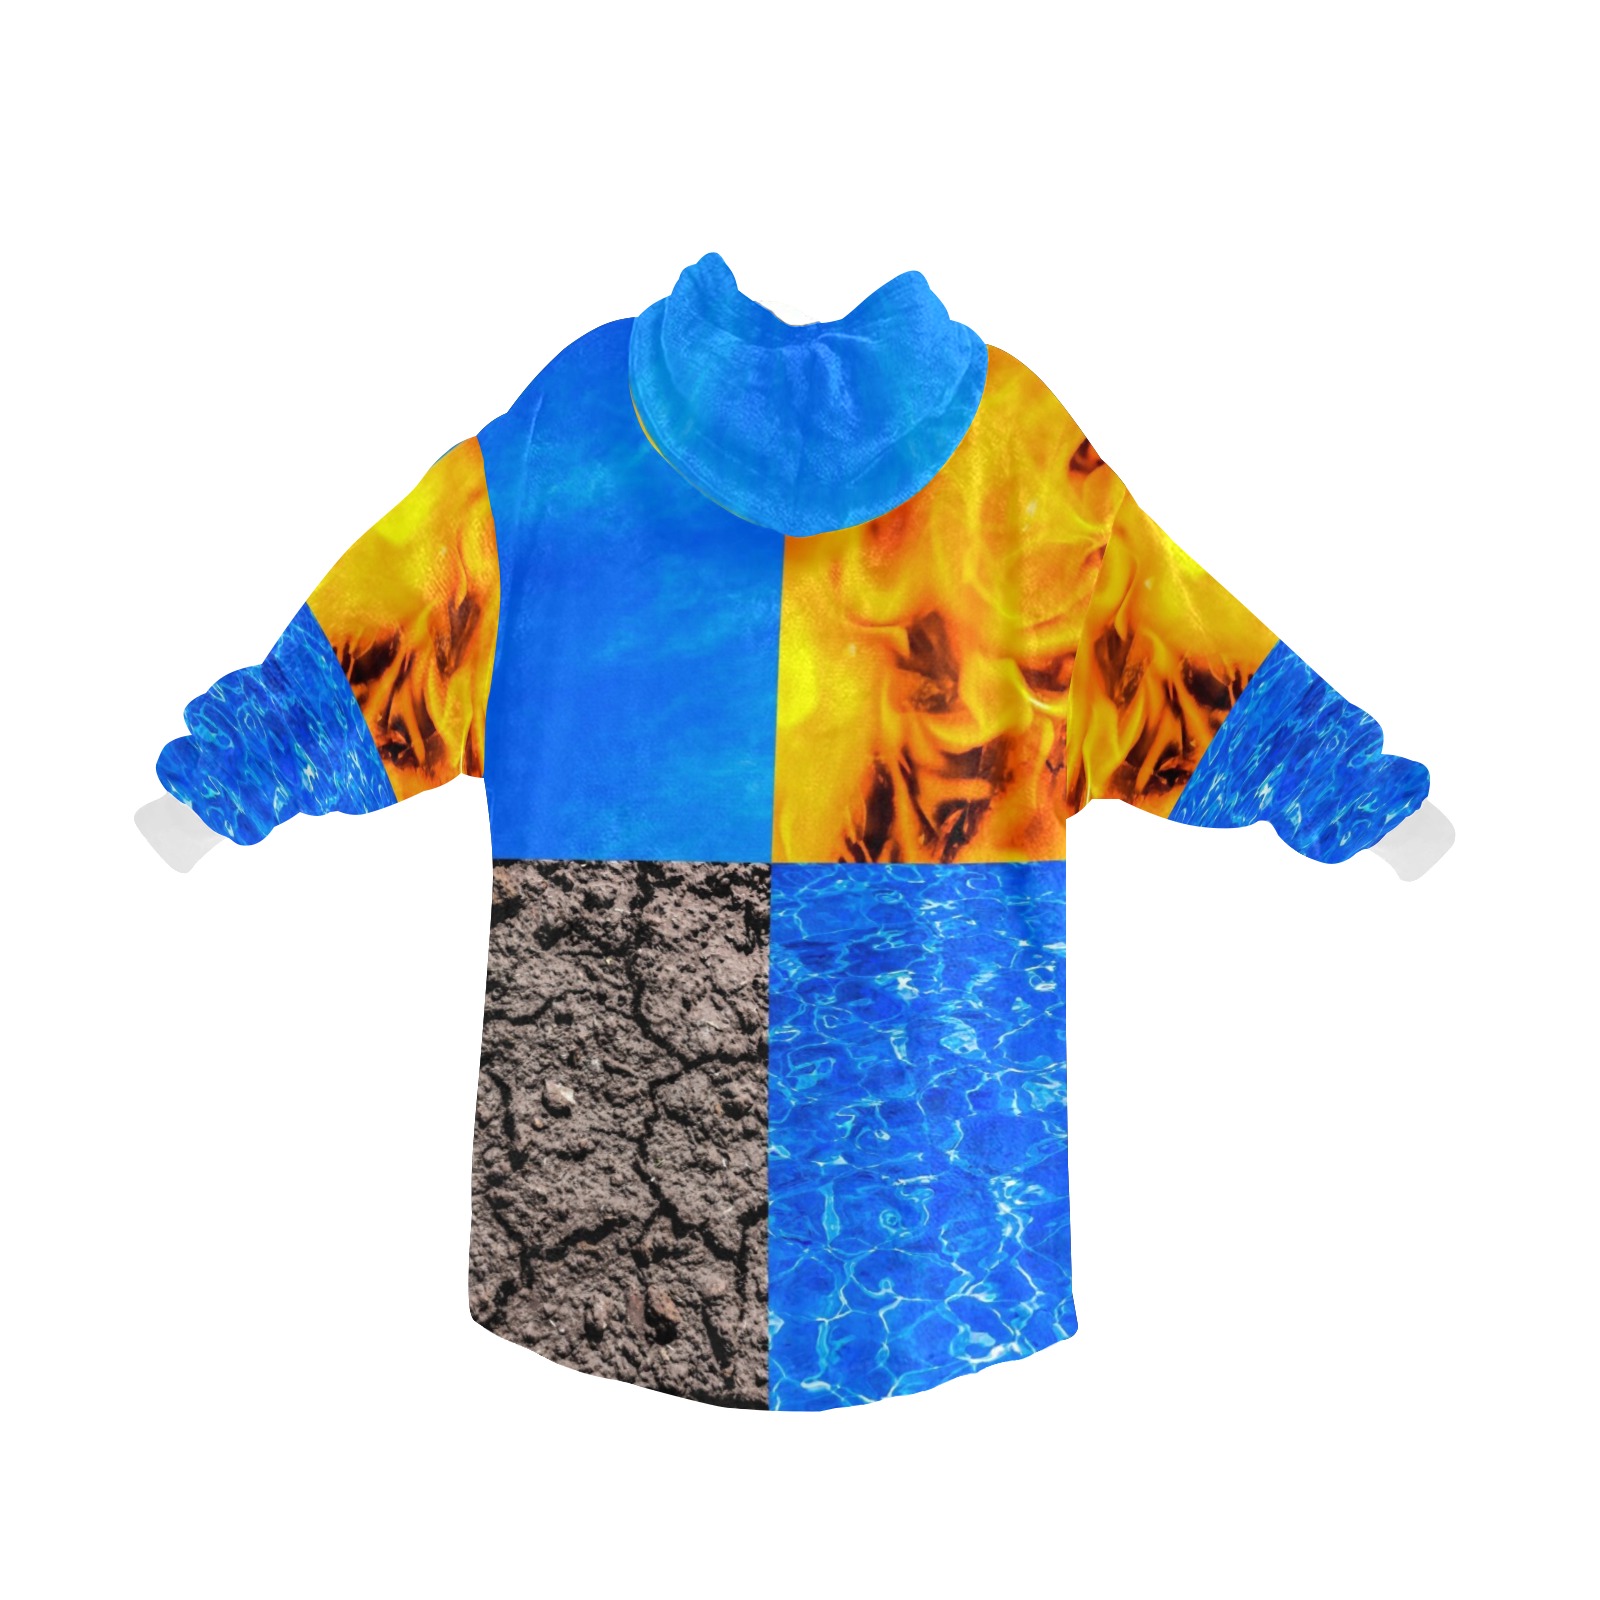 Four Elements Water Fire Earth Air Blanket Hoodie for Women